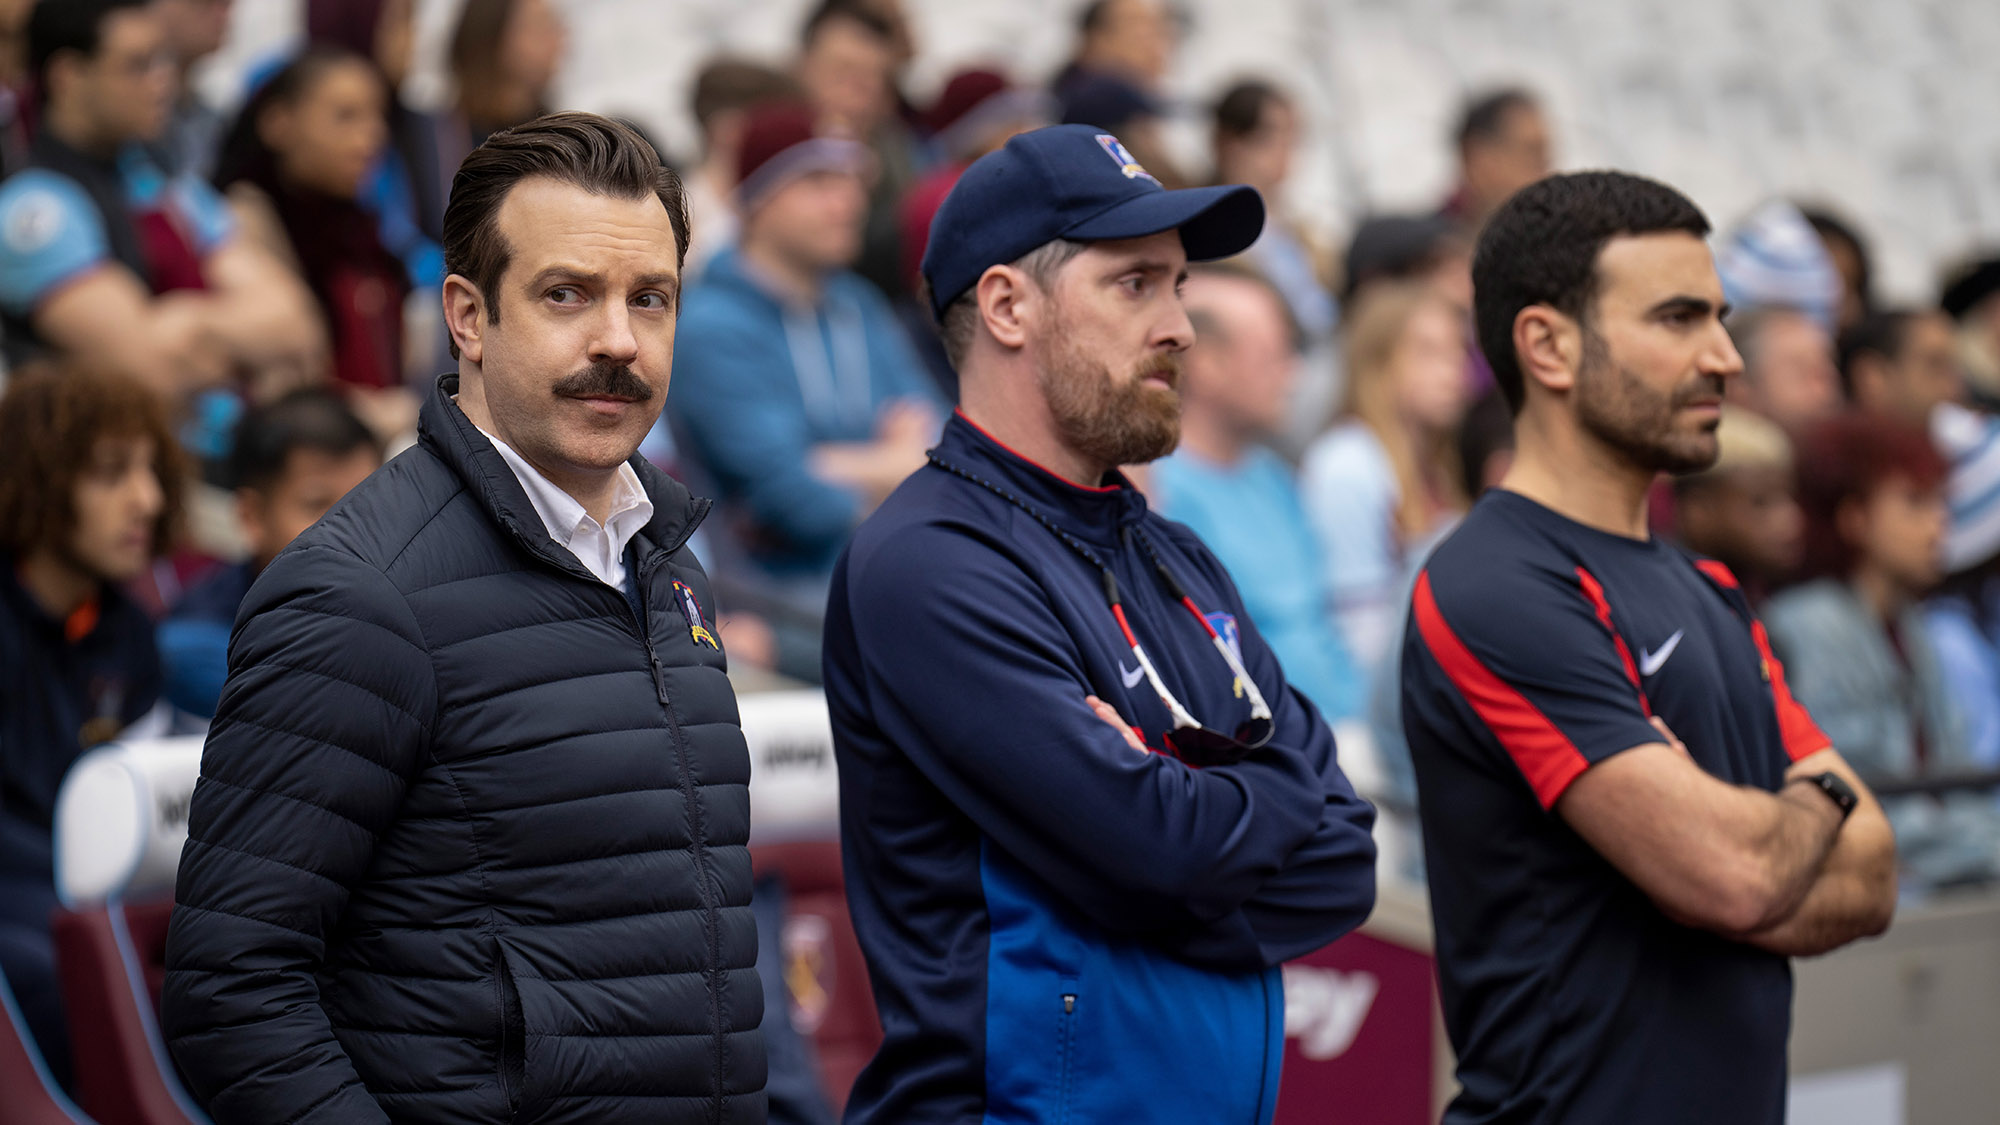 (L to R) Jason Sudeikis as Ted Lasso, Brendan Hunt as Coach Byrd and Brett Goldstein as Roy Kent, standing on the sidelines, in Ted Lasso Season 3